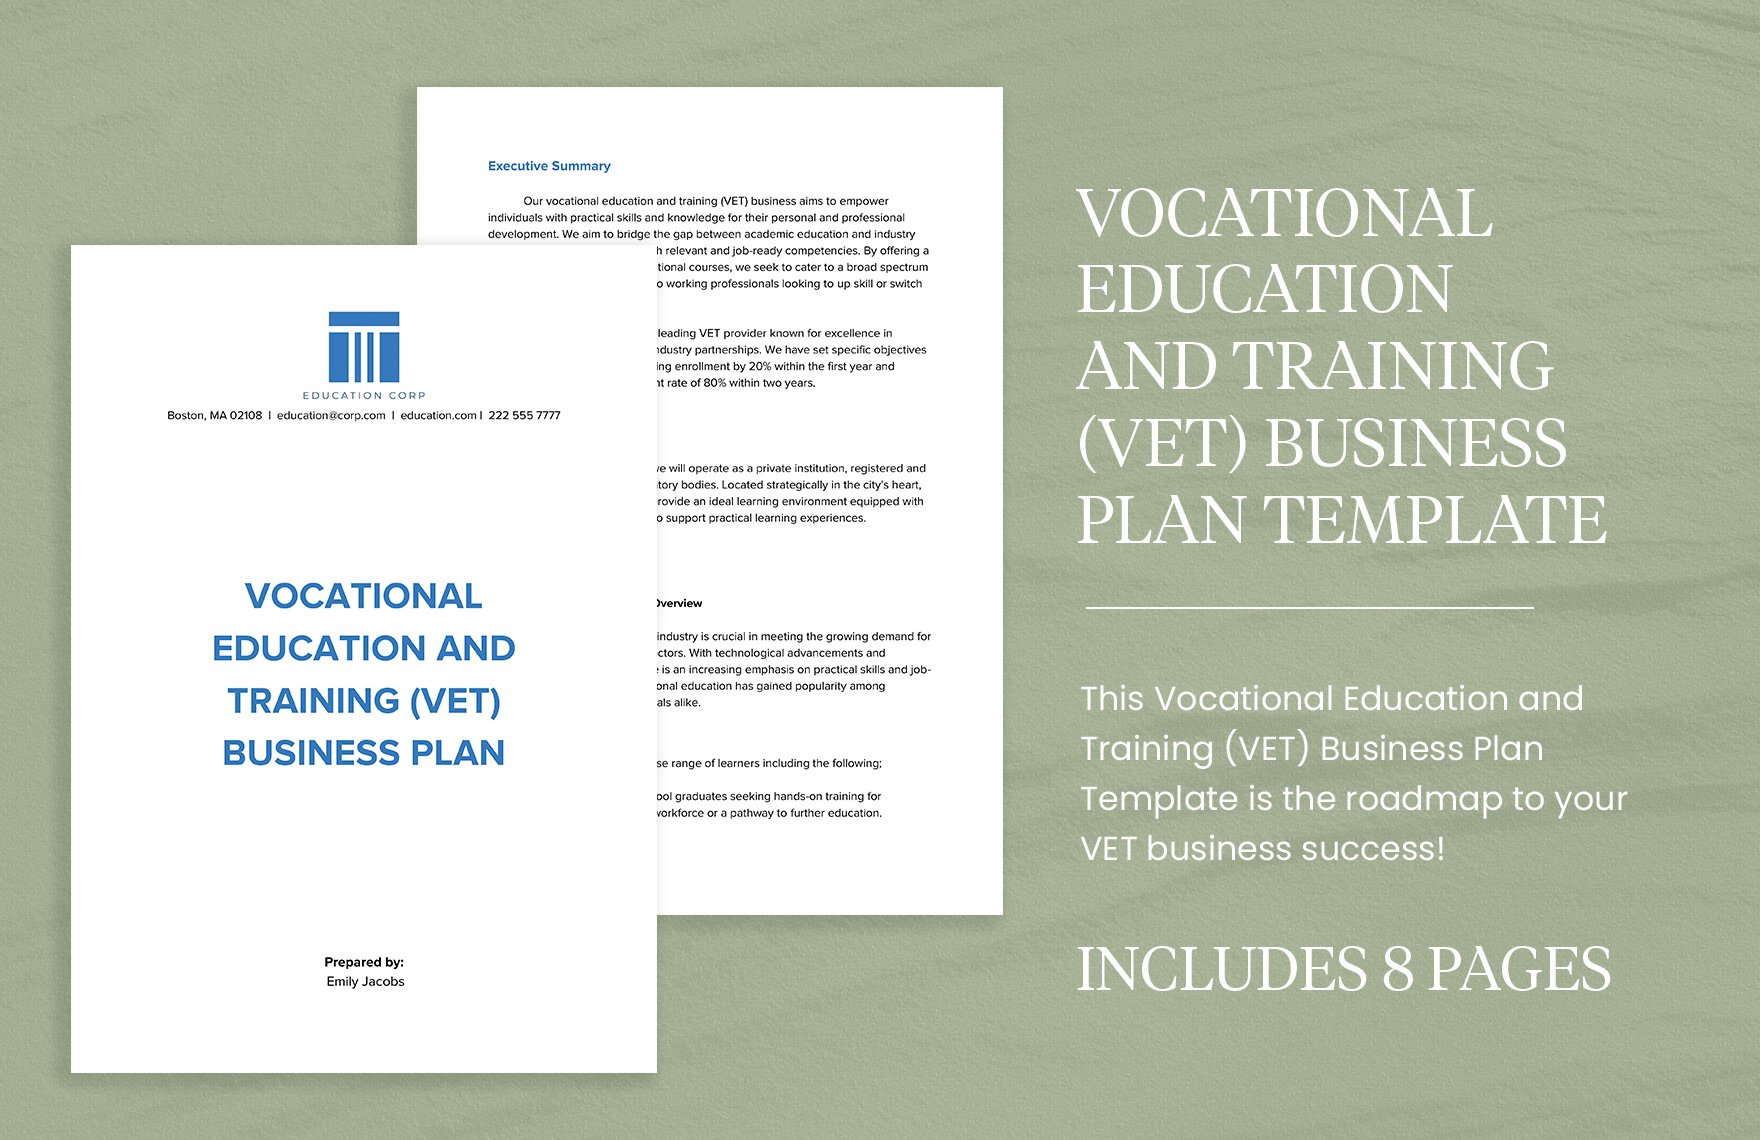 Vocational Education and Training (VET) Business Plan Template